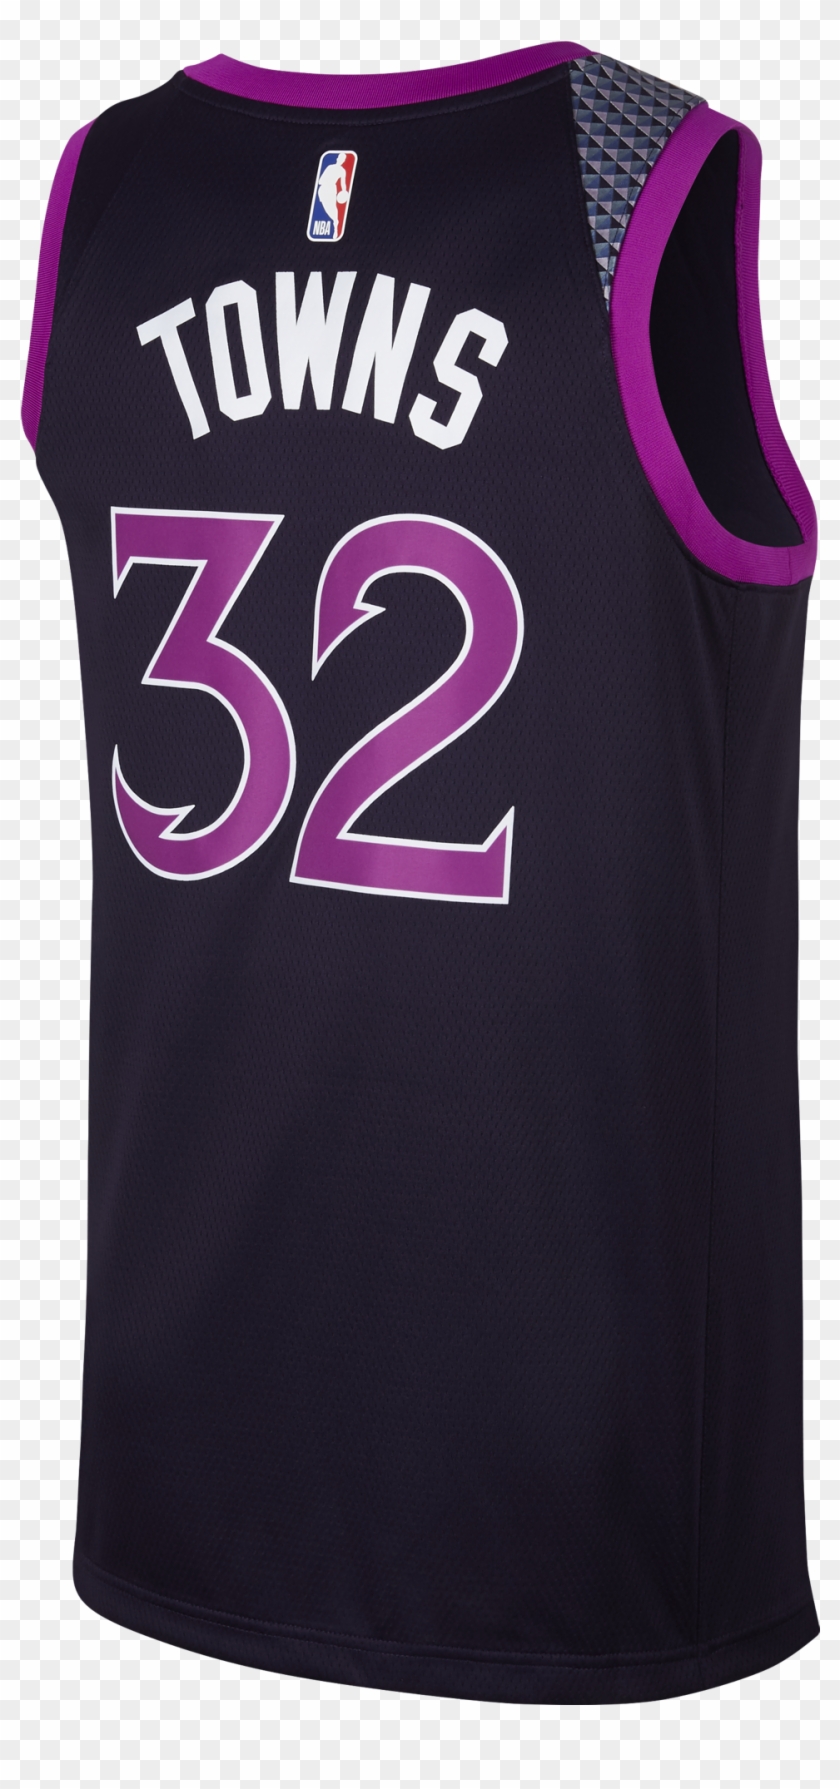 Karl-anthony Towns Swingman Jersey - Active Tank Clipart #6055153